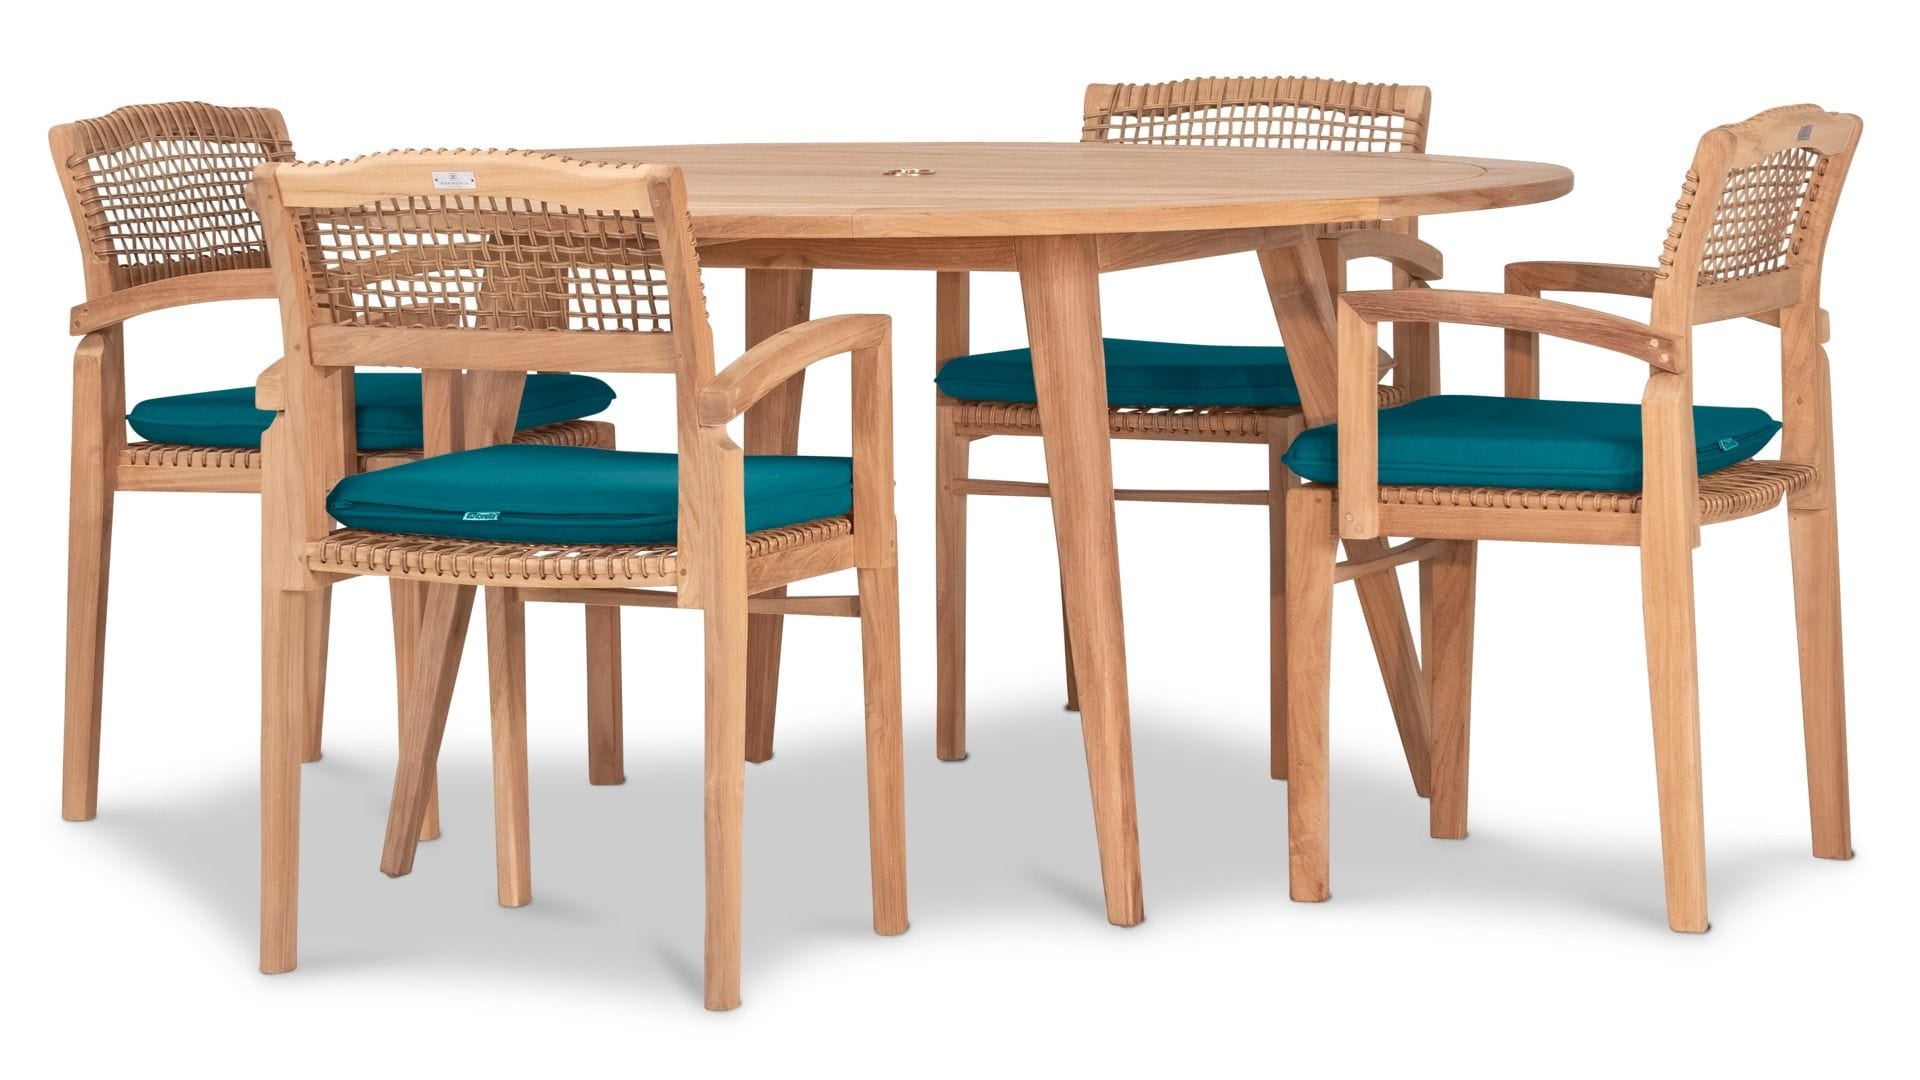 Harmonia Living Outdoor Dining Set Harmonia Living - Sands 5 Piece Arm Round Dining Set- Table and Four Arm Dining Chairs | HL-SNDS-SD-5ARDS